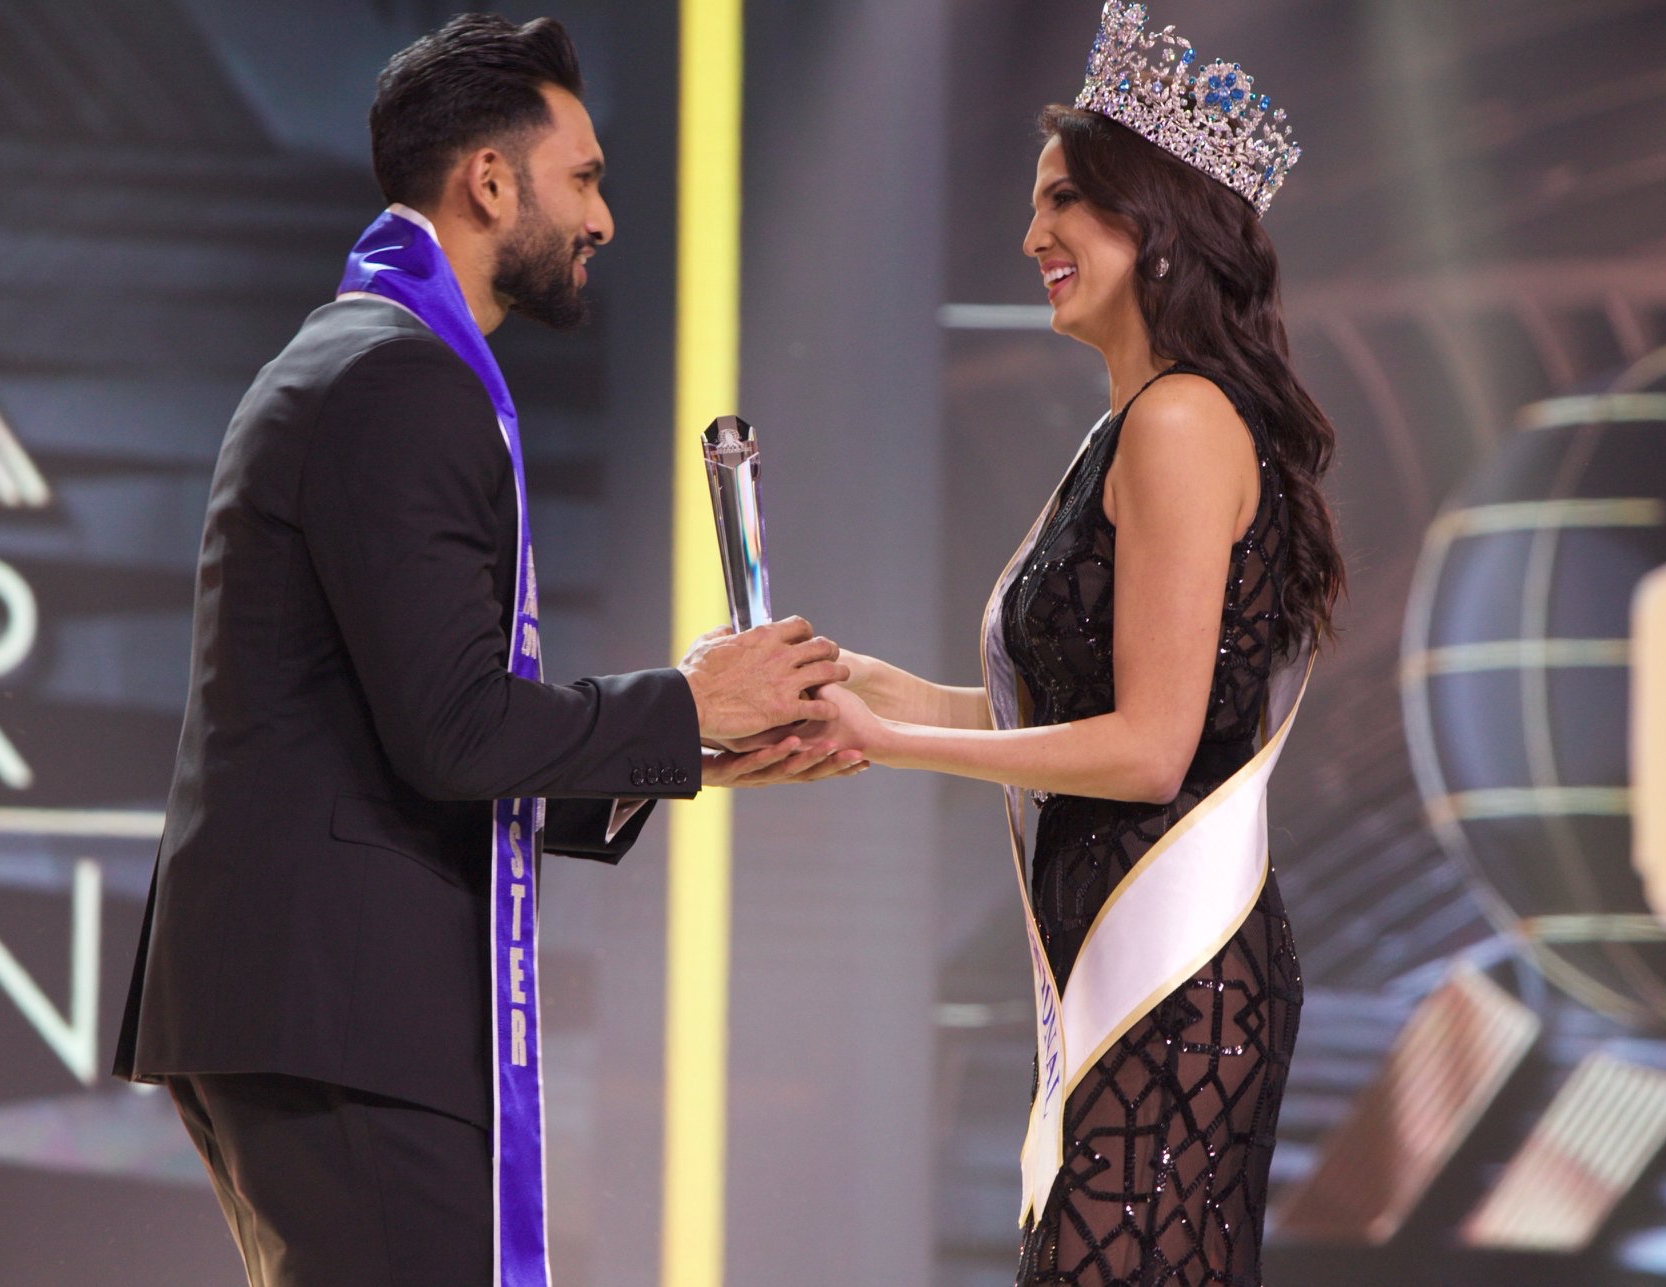 Mister Supranational 2018 India Prathamesh Maulingkar winning the contest with Puerto Rico Valeria Vazquez giving the trophy